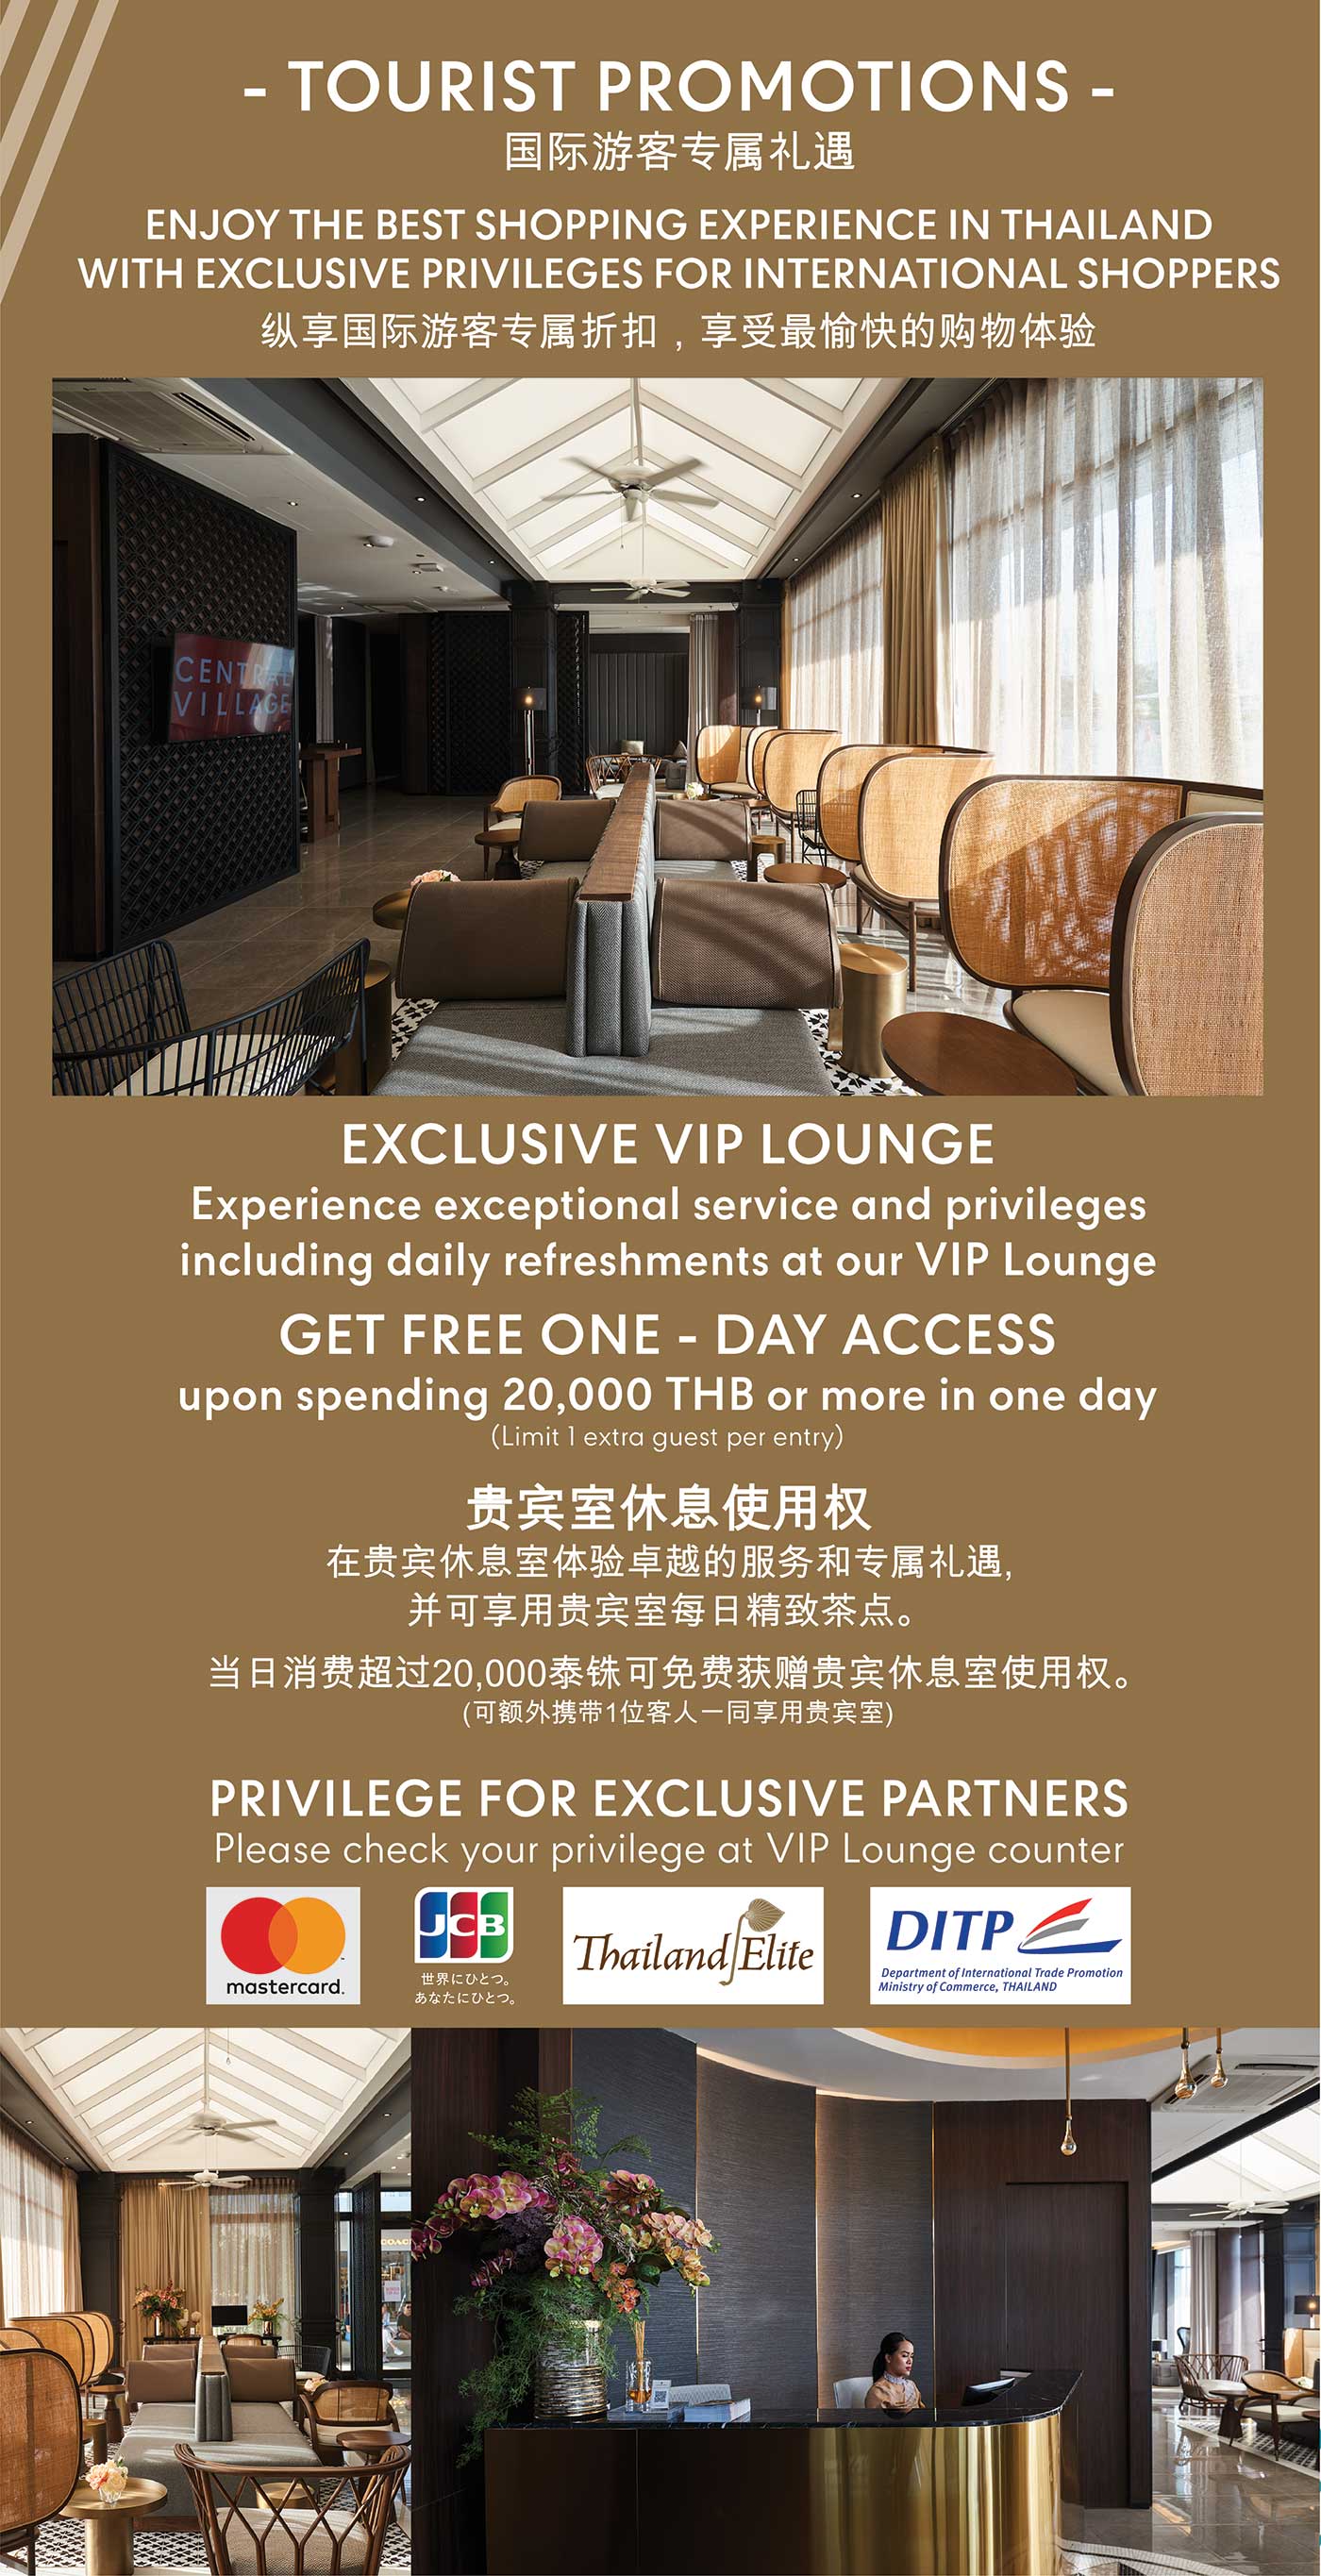 For VIP privileges, please see